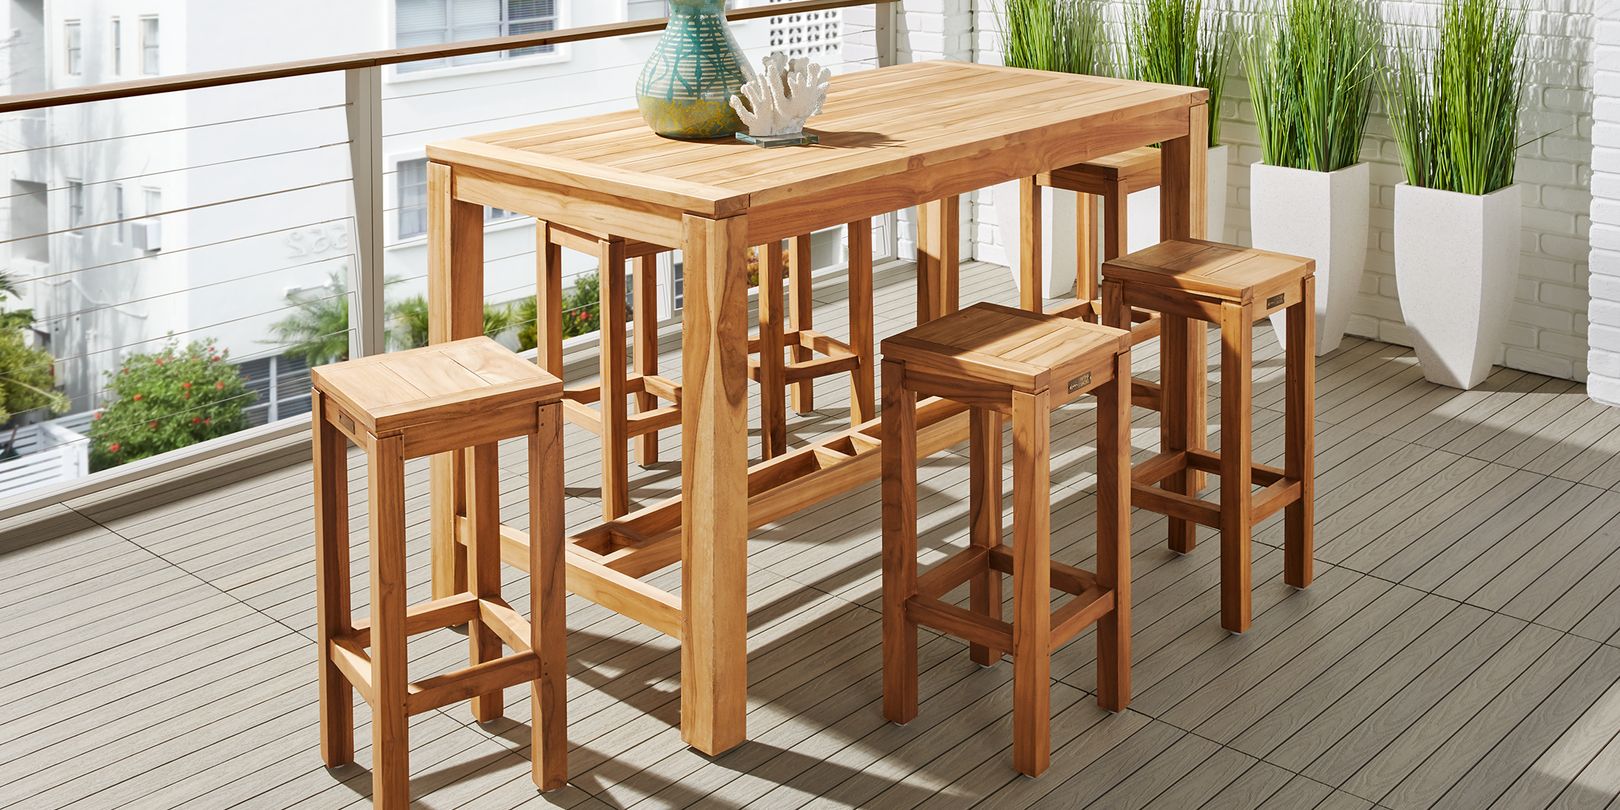 Photo of teak bar height dining table with stools